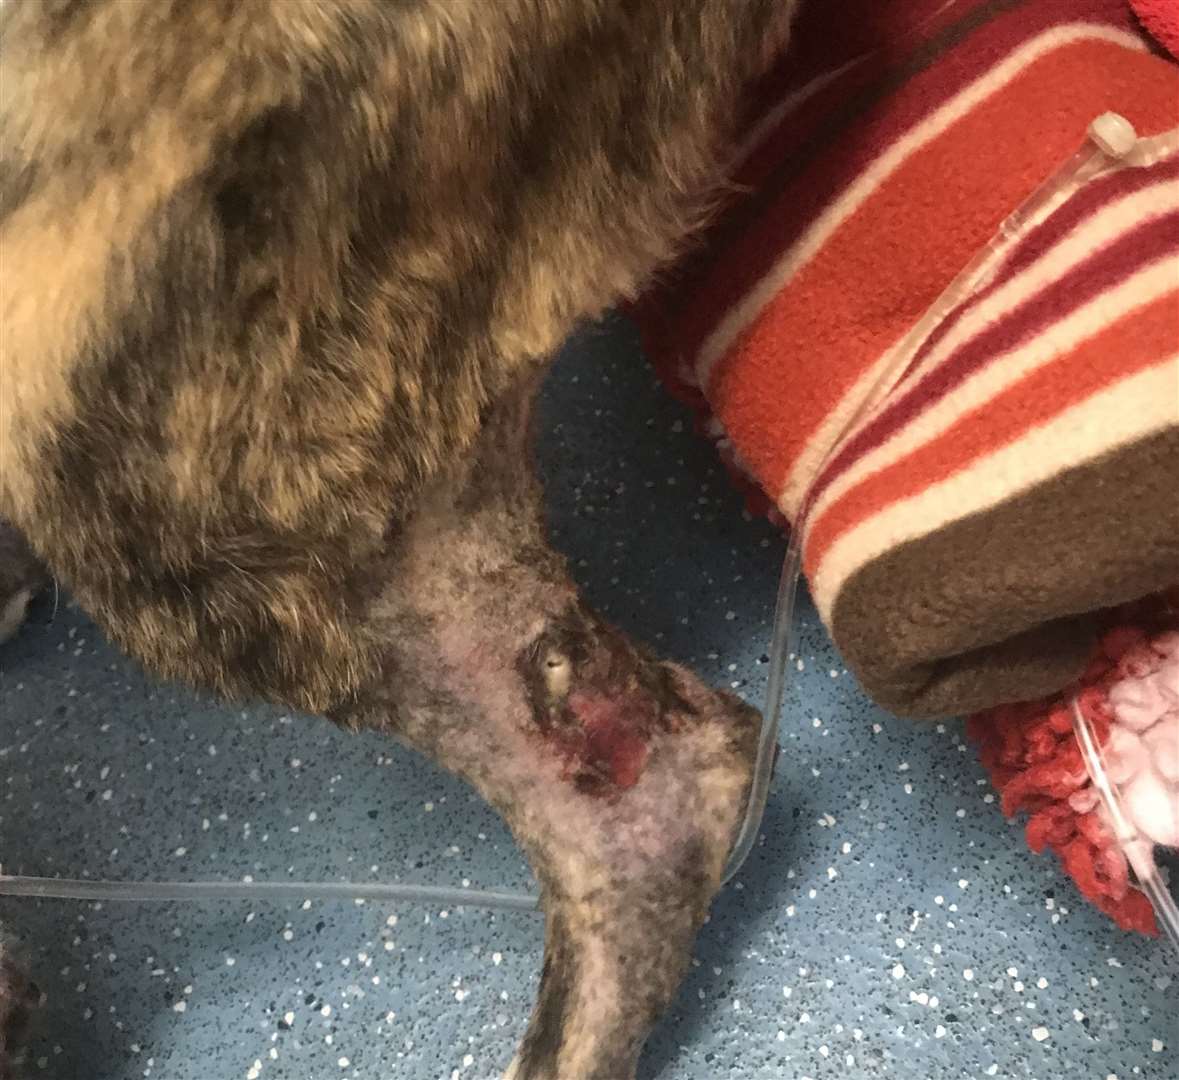 It was feared the dog's leg may have had to be amputated. Picture: RSPCA